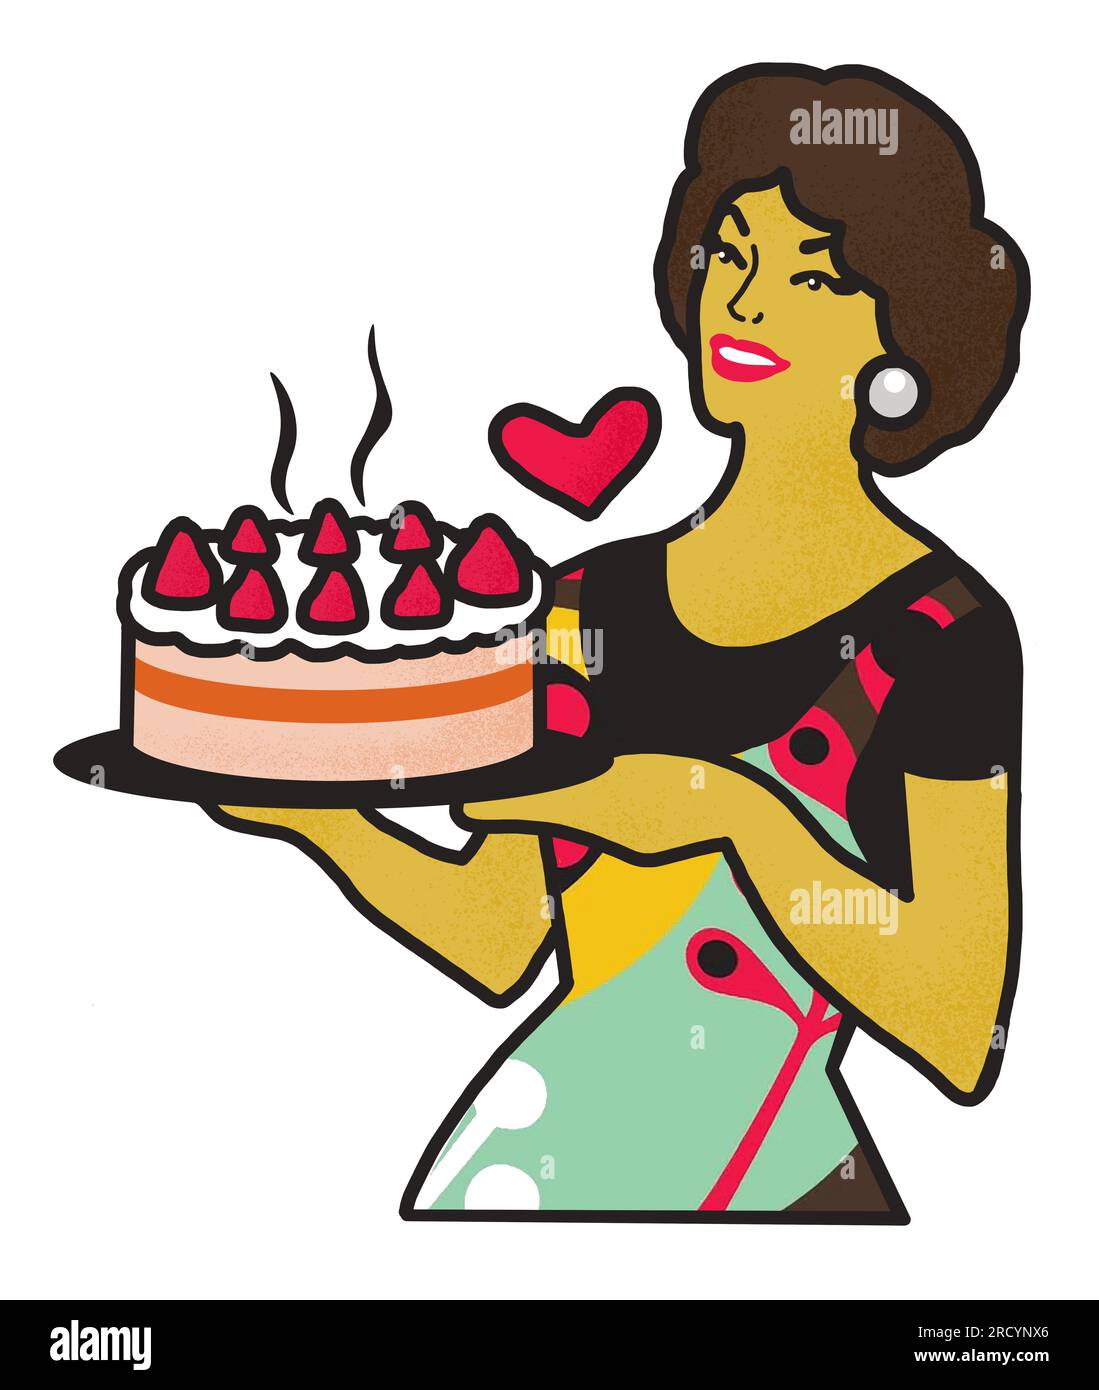 Retro Housewife Holding a Cake Illustration, 70s Style Vintage Woman Baking a Dessert Illustration Stock Photo